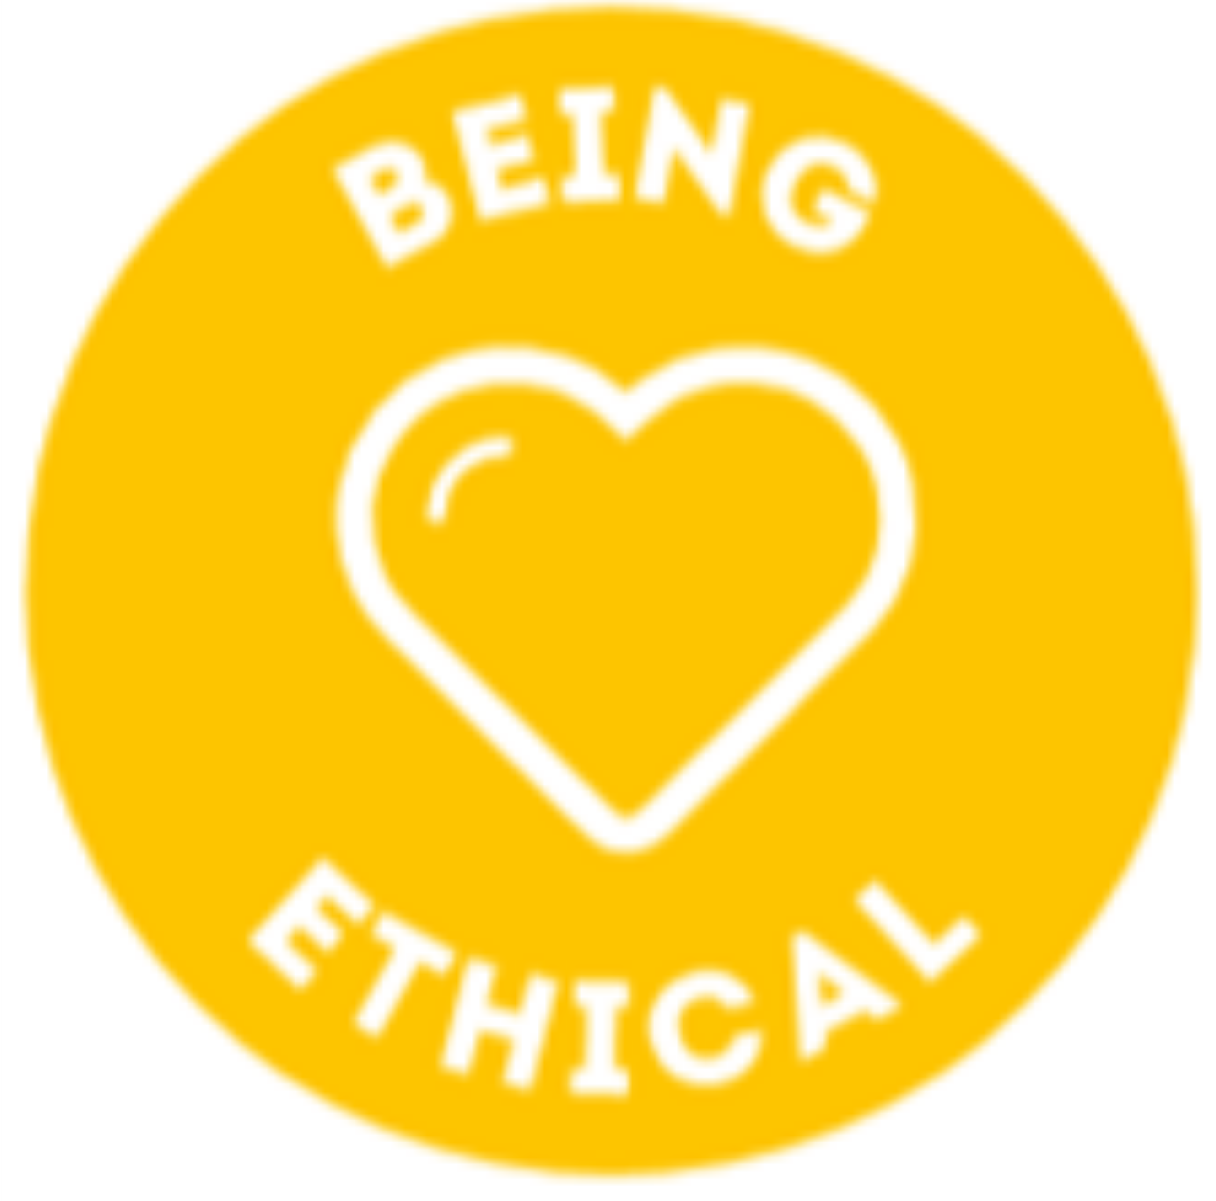 Being ethical.png